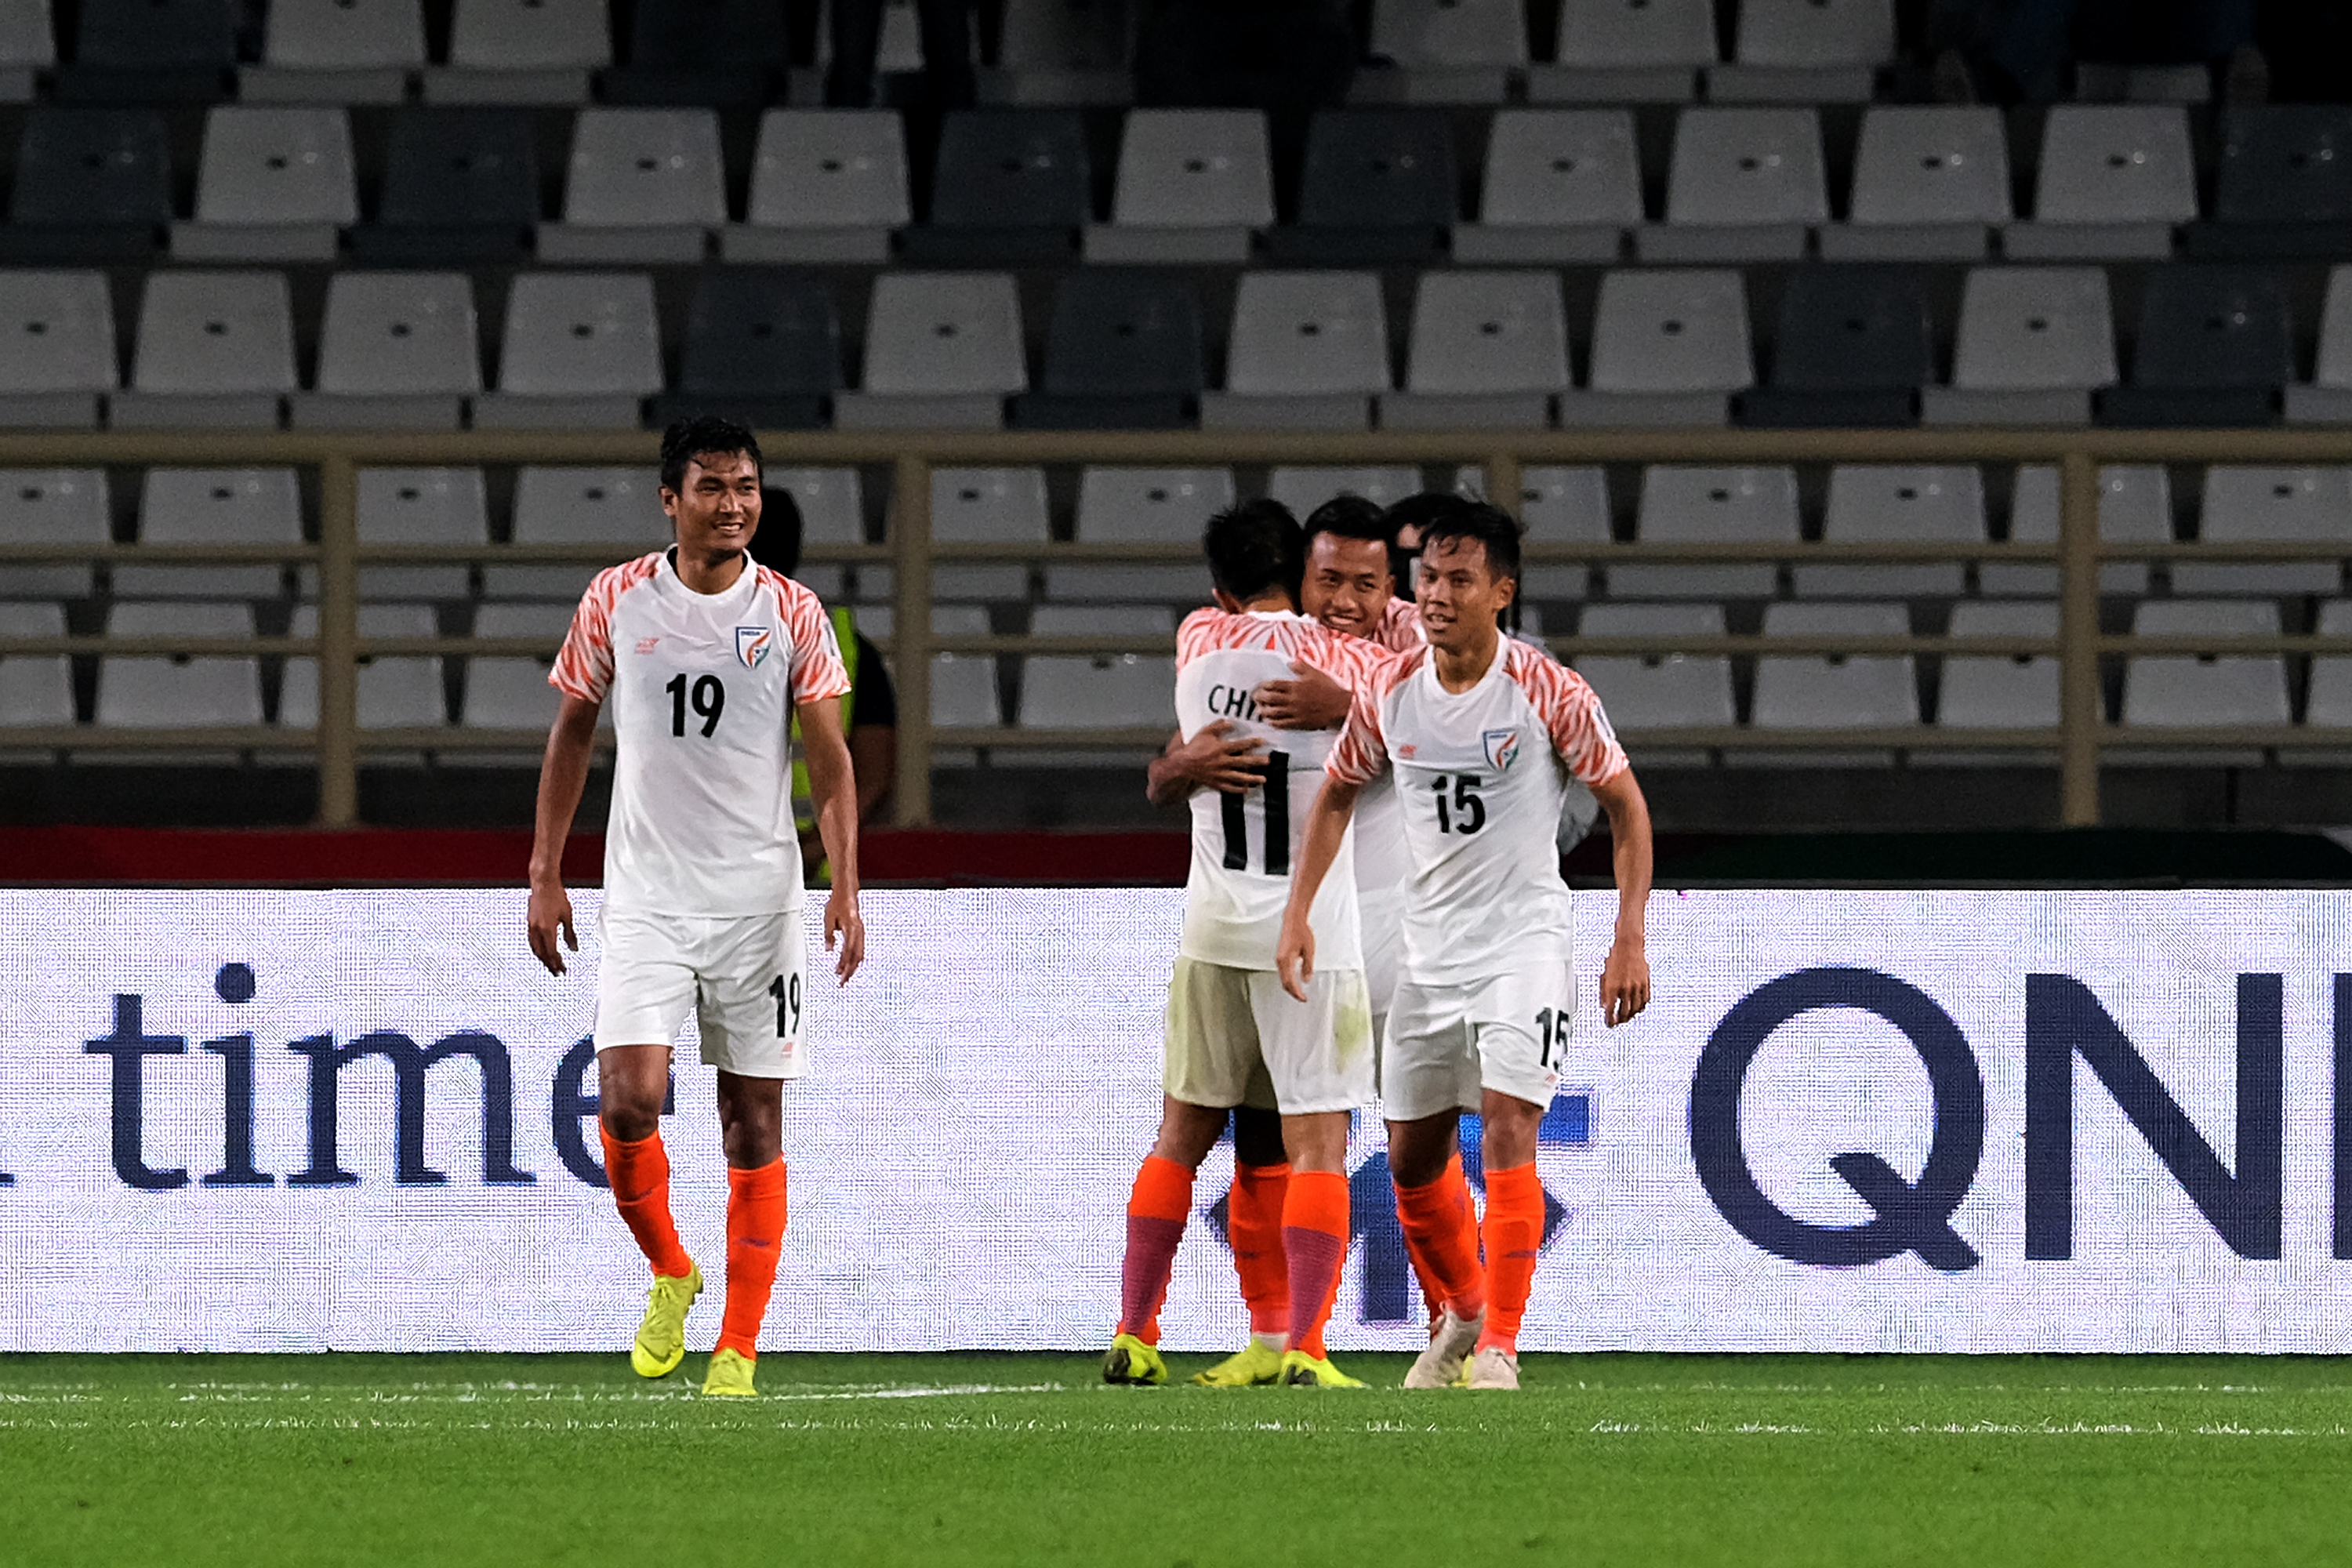 AFC Asian Cup 2019 | Why India should go for kill against UAE